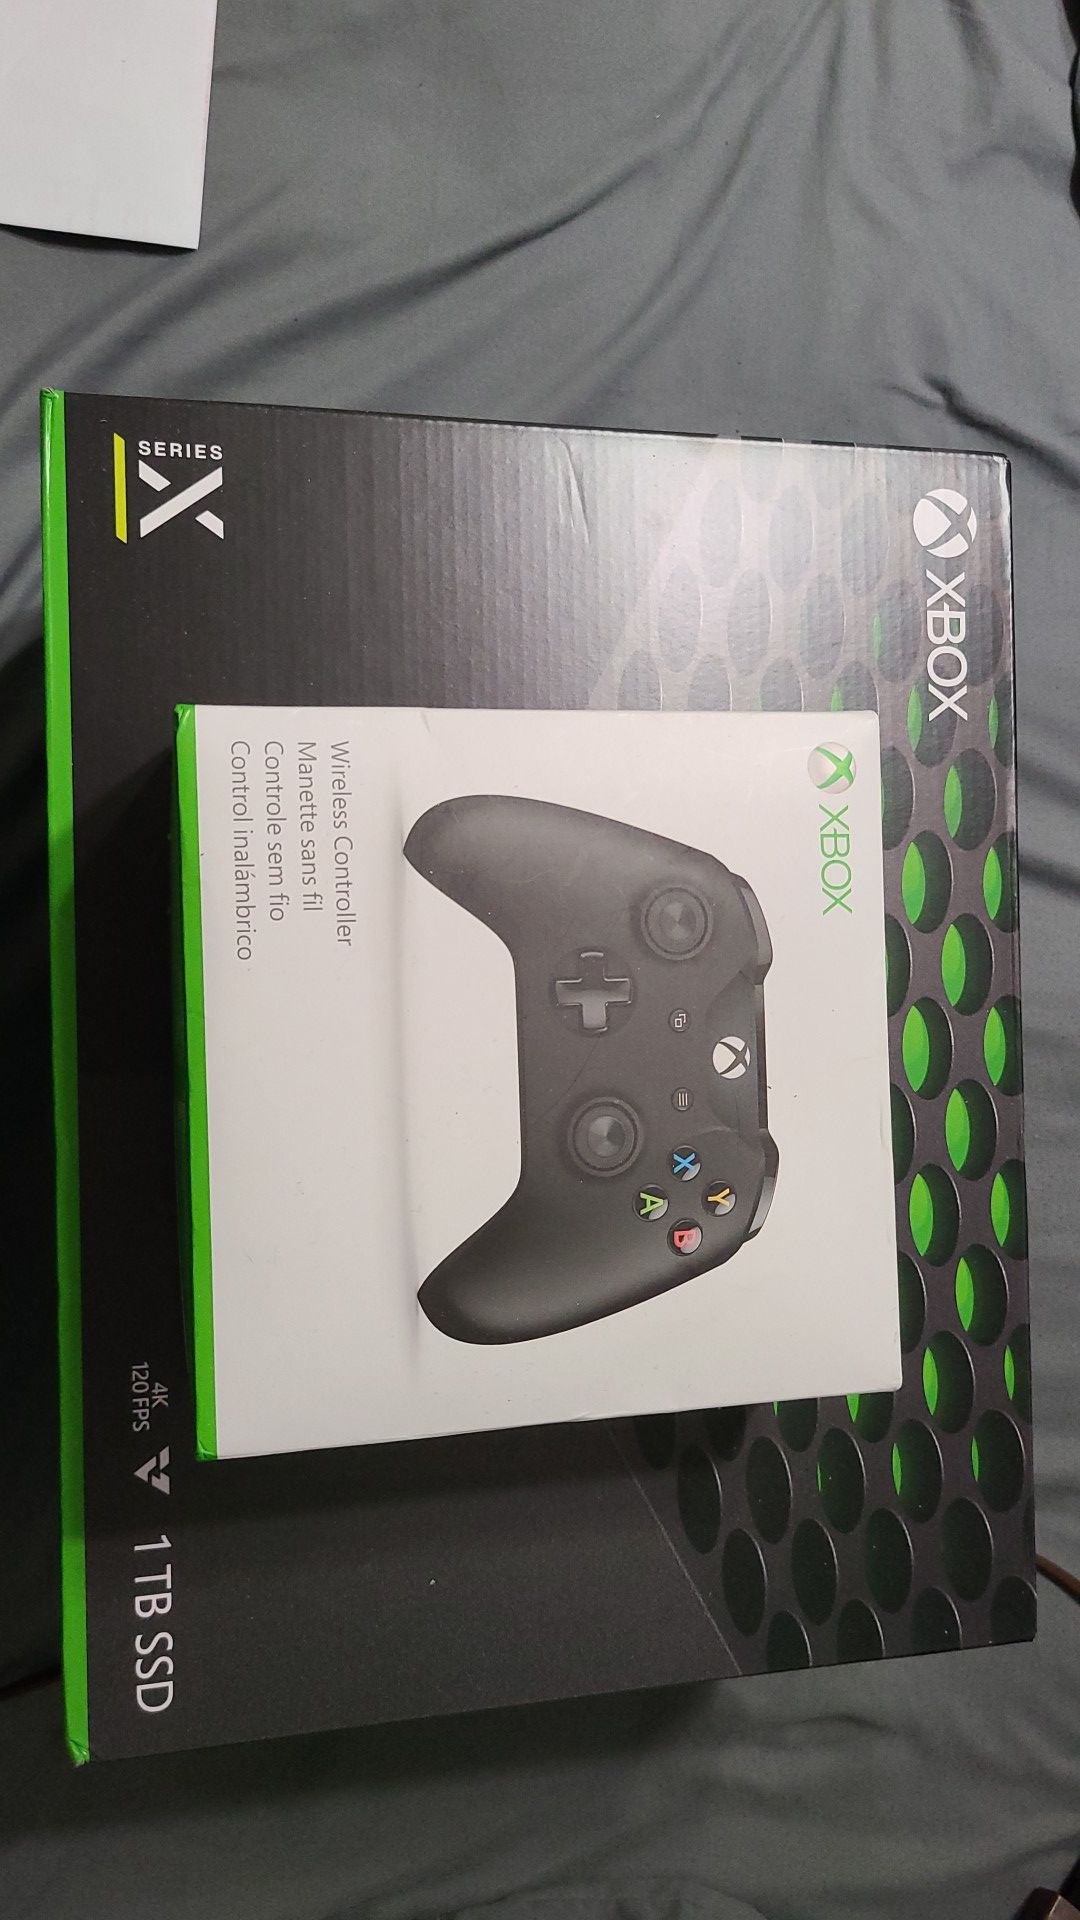 Xbox series x with an extra xbox one remote